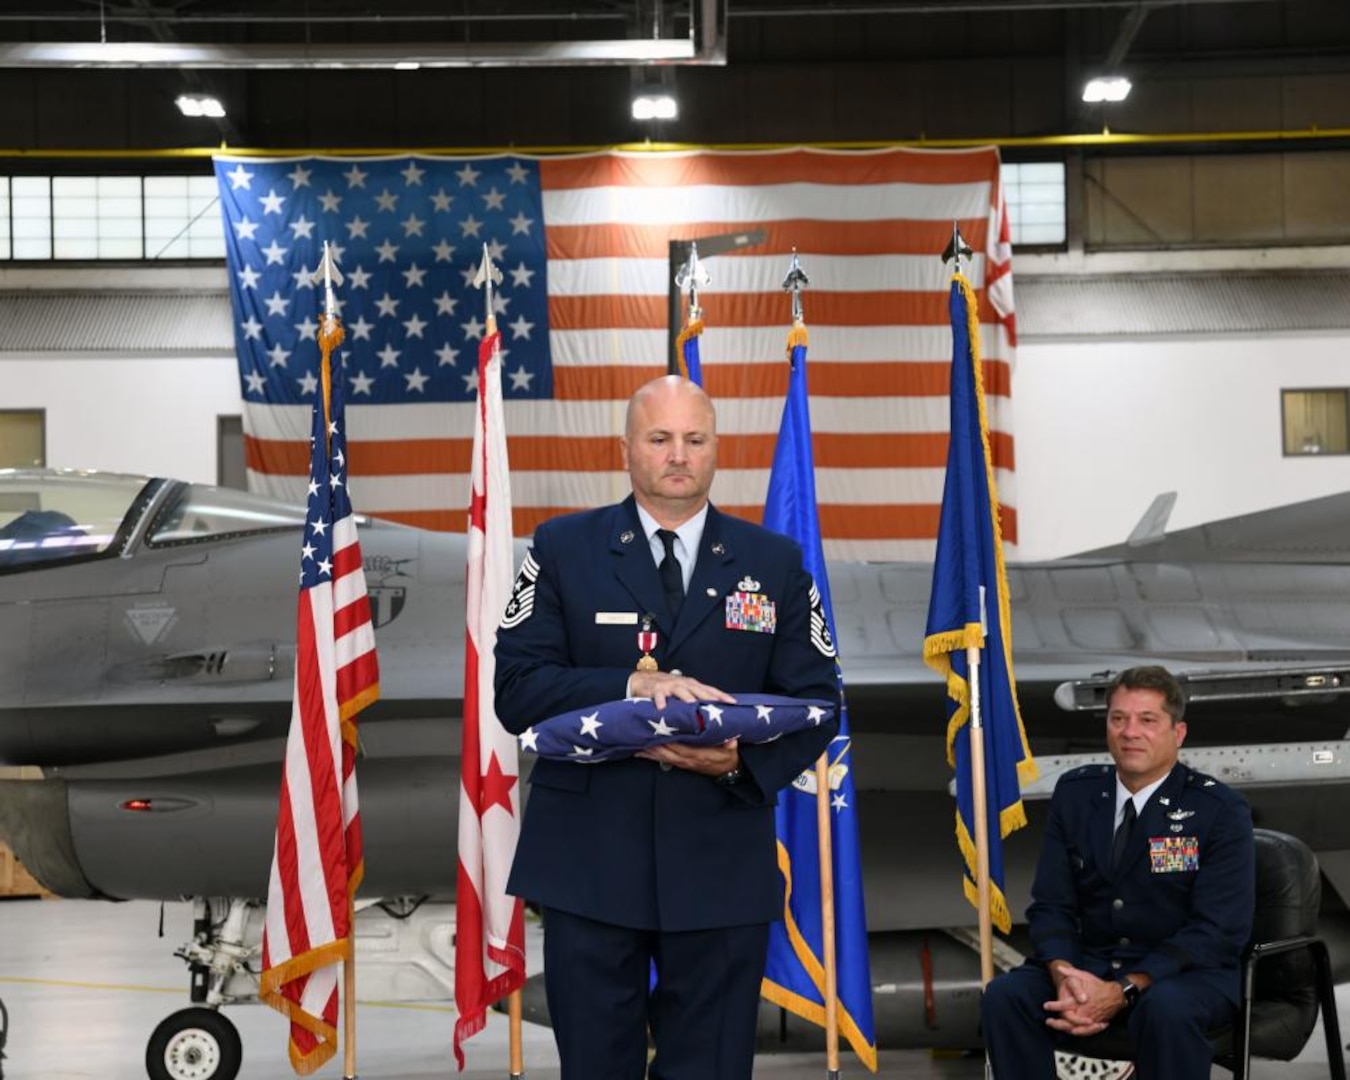 Chief Master Sgt. Charles C. Gass Jr., state command chief, D.C. National Guard, holds a flag at Joint Base Andrews Air Base, Maryland, Oct. 16, 2022. Gass was ceremoniously retired nearly 30 years of military service. (U.S. Air National Guard photo by Staff Sgt. Anthony Lee Small)